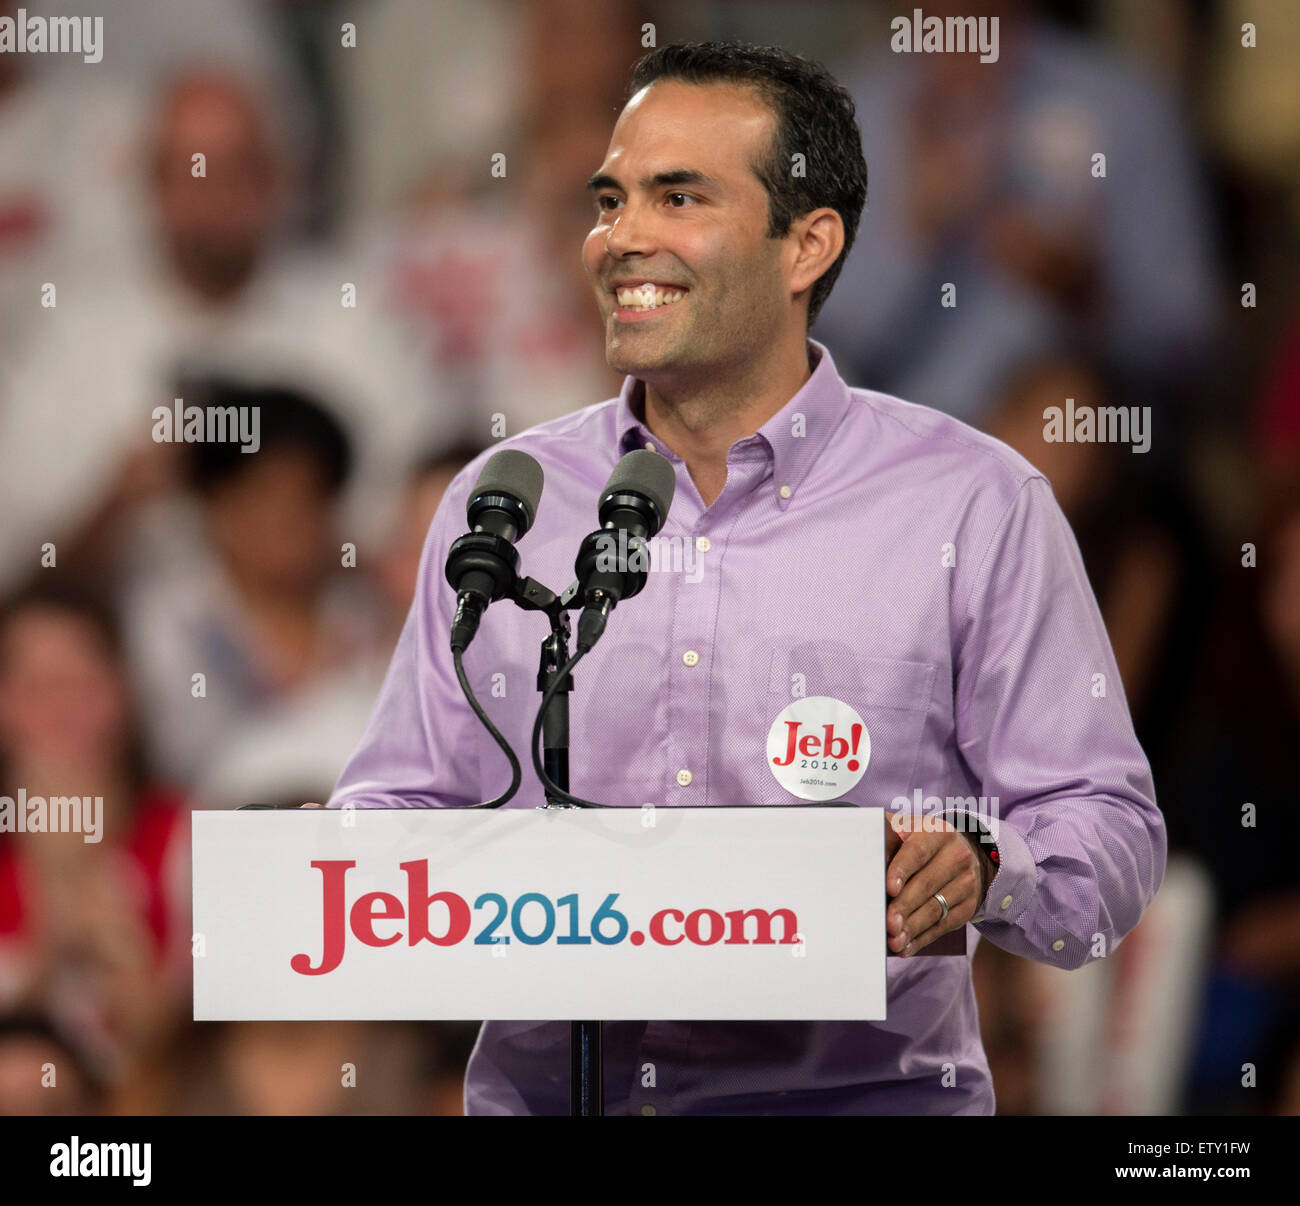 Miami, Florida, USA. 15th June, 2015. GEORGE P. BUSH, Texas Land Commissioner and son of former Florida Governor JEB BUSH, makes introductory remarks at his father's announcement at Miami-Dade College that he's seeking the Republican nomination to run for U.S. President in 2016. © Brian Cahn/ZUMA Wire/Alamy Live News Stock Photo